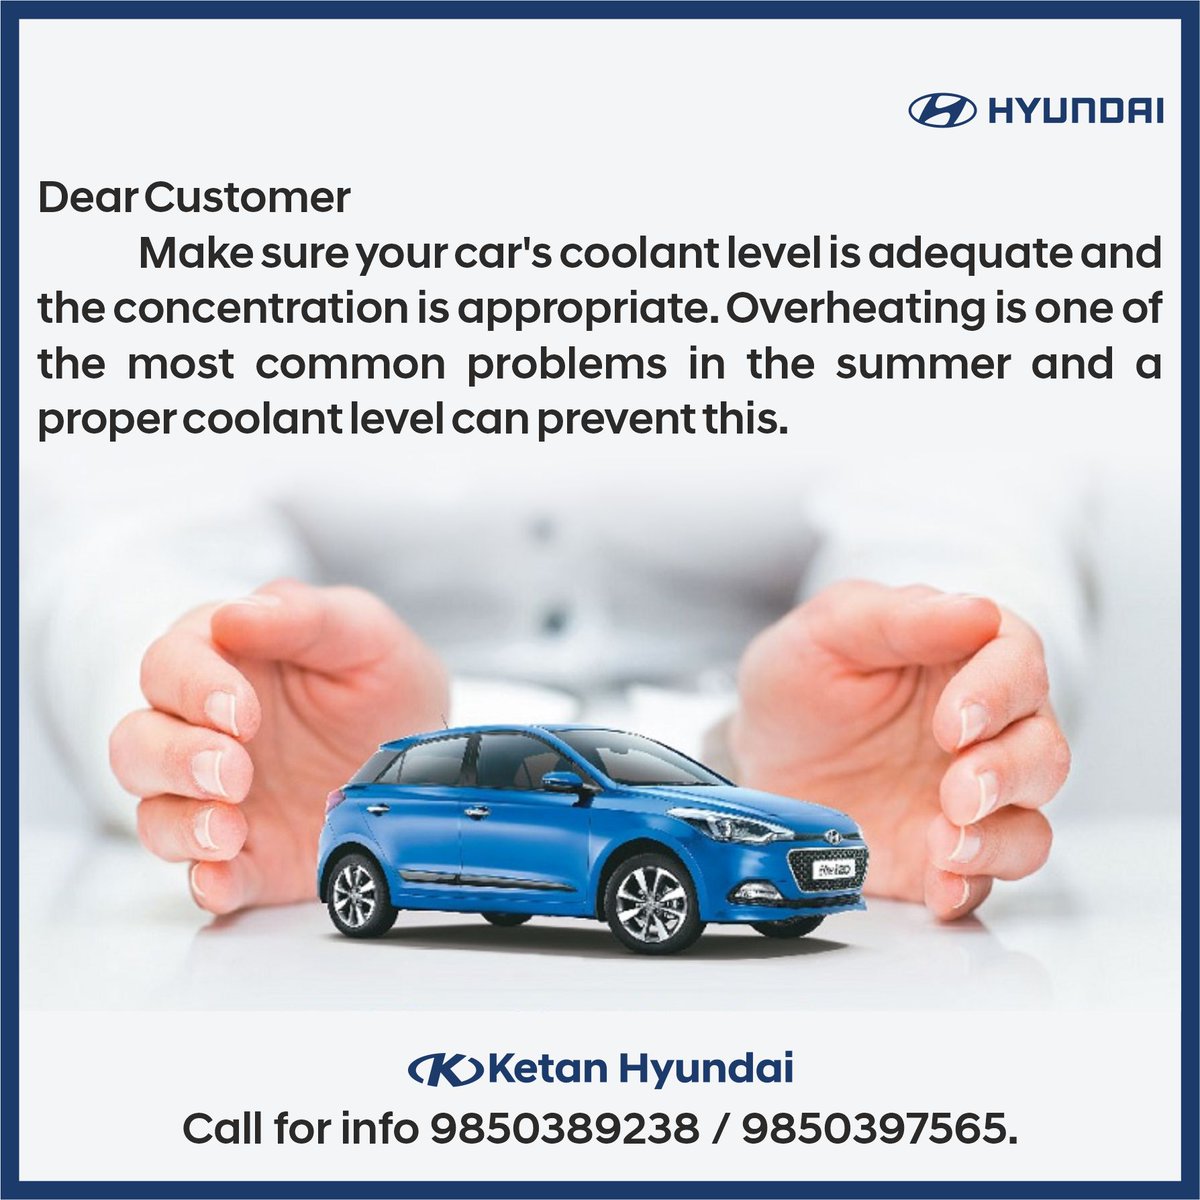 Dear Customer
Make sure your car's coolant level is adequate and the concentration is appropriate. Overheating is one of the most common problems in the summer and a proper coolant level can prevent this. Call for info 9850389238 / 9850397565

#HyundaiIndia #HyundaiService